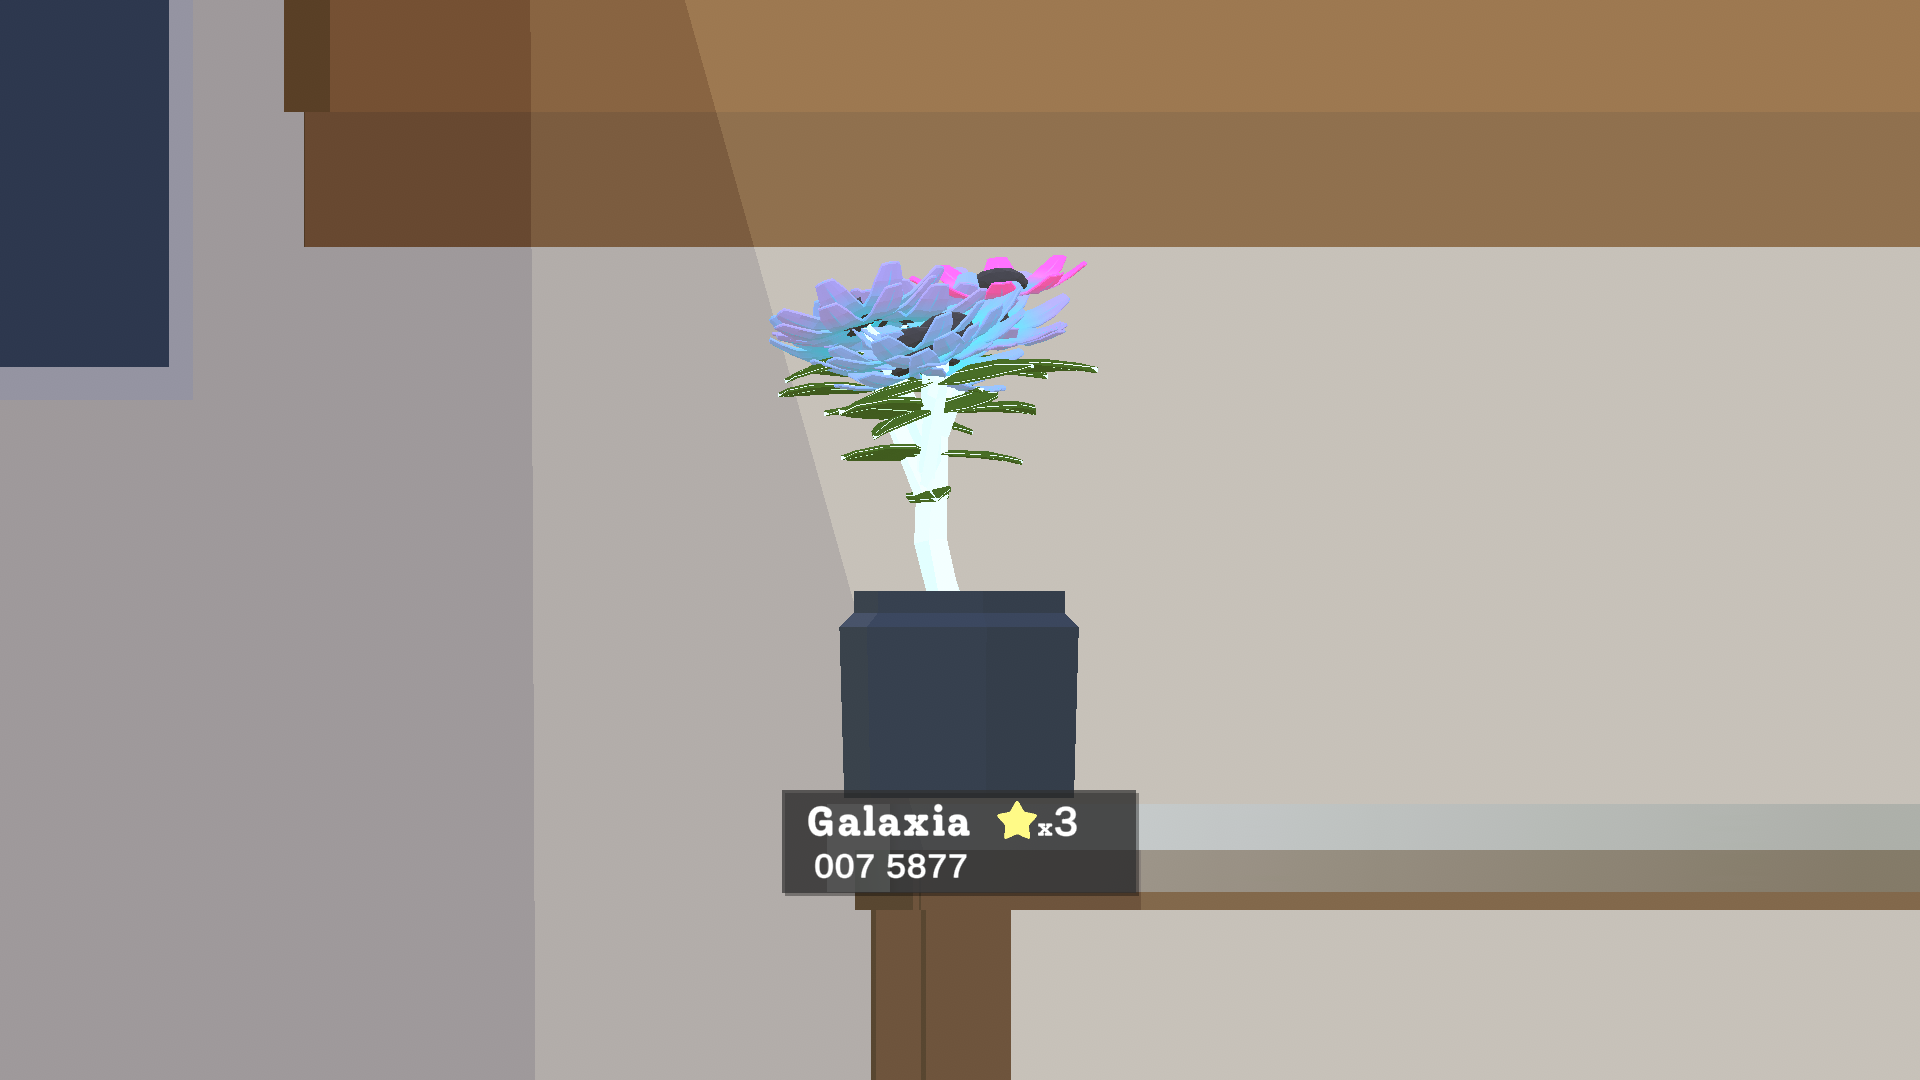 Here's Galaxia! She's a beautiful garden plant with 3 rare traits 